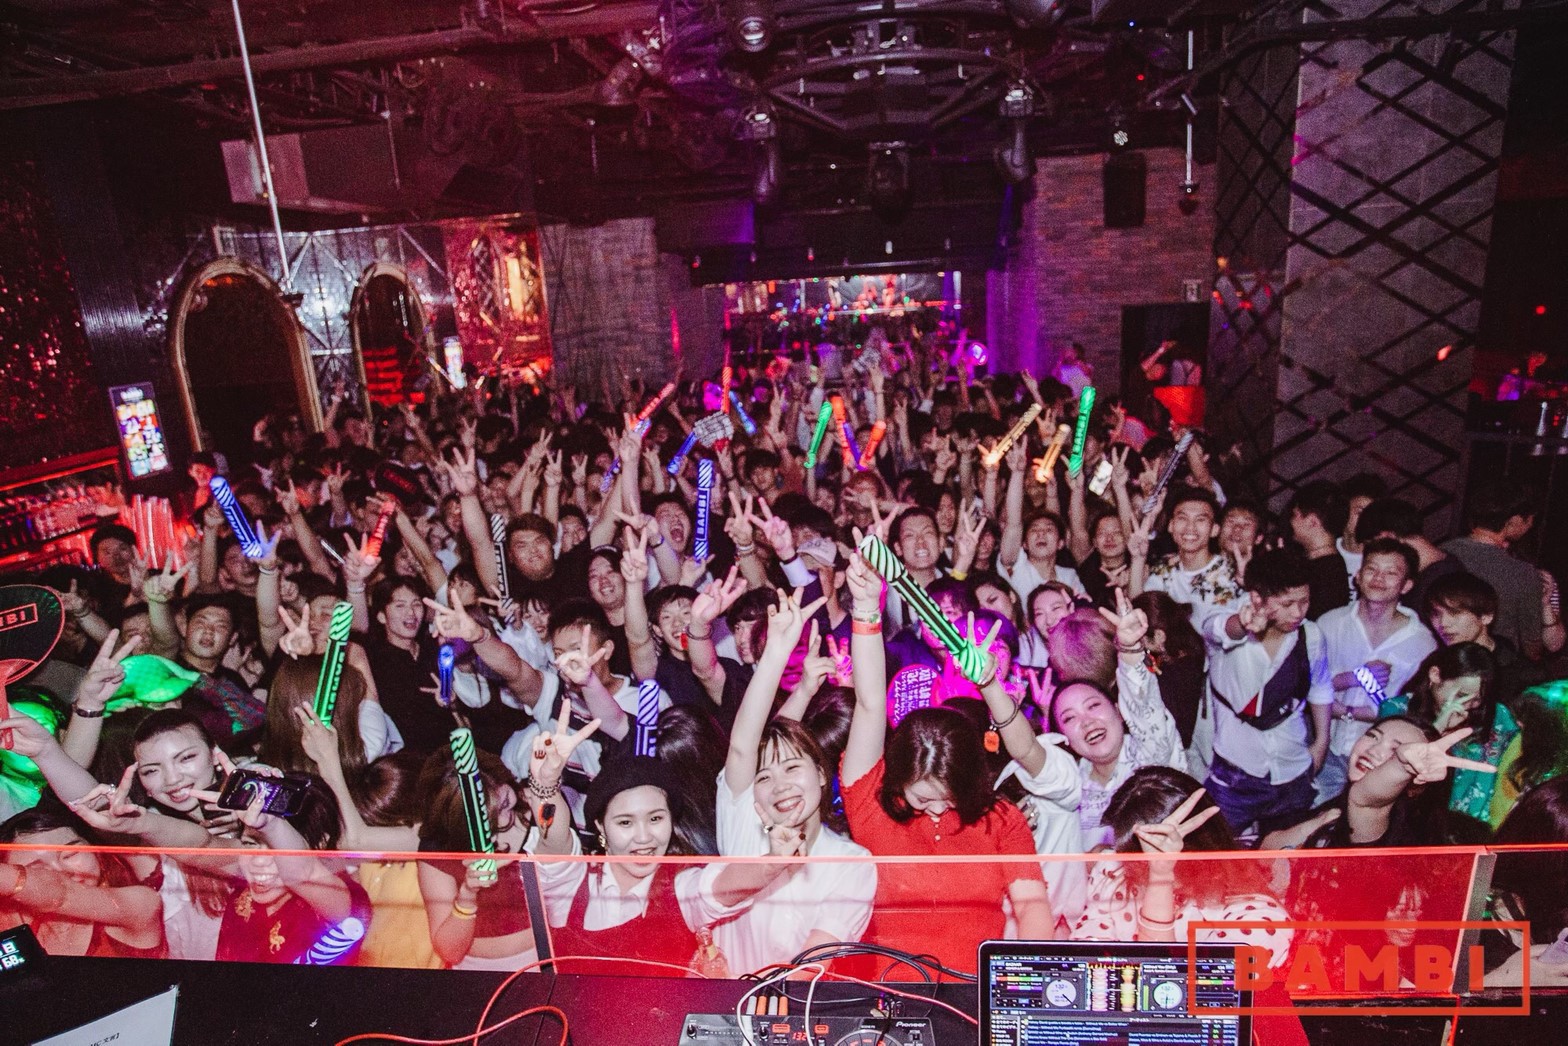 Bambi: Osaka’s Hottest Nightclub for Japanese Youth and Pop Culture